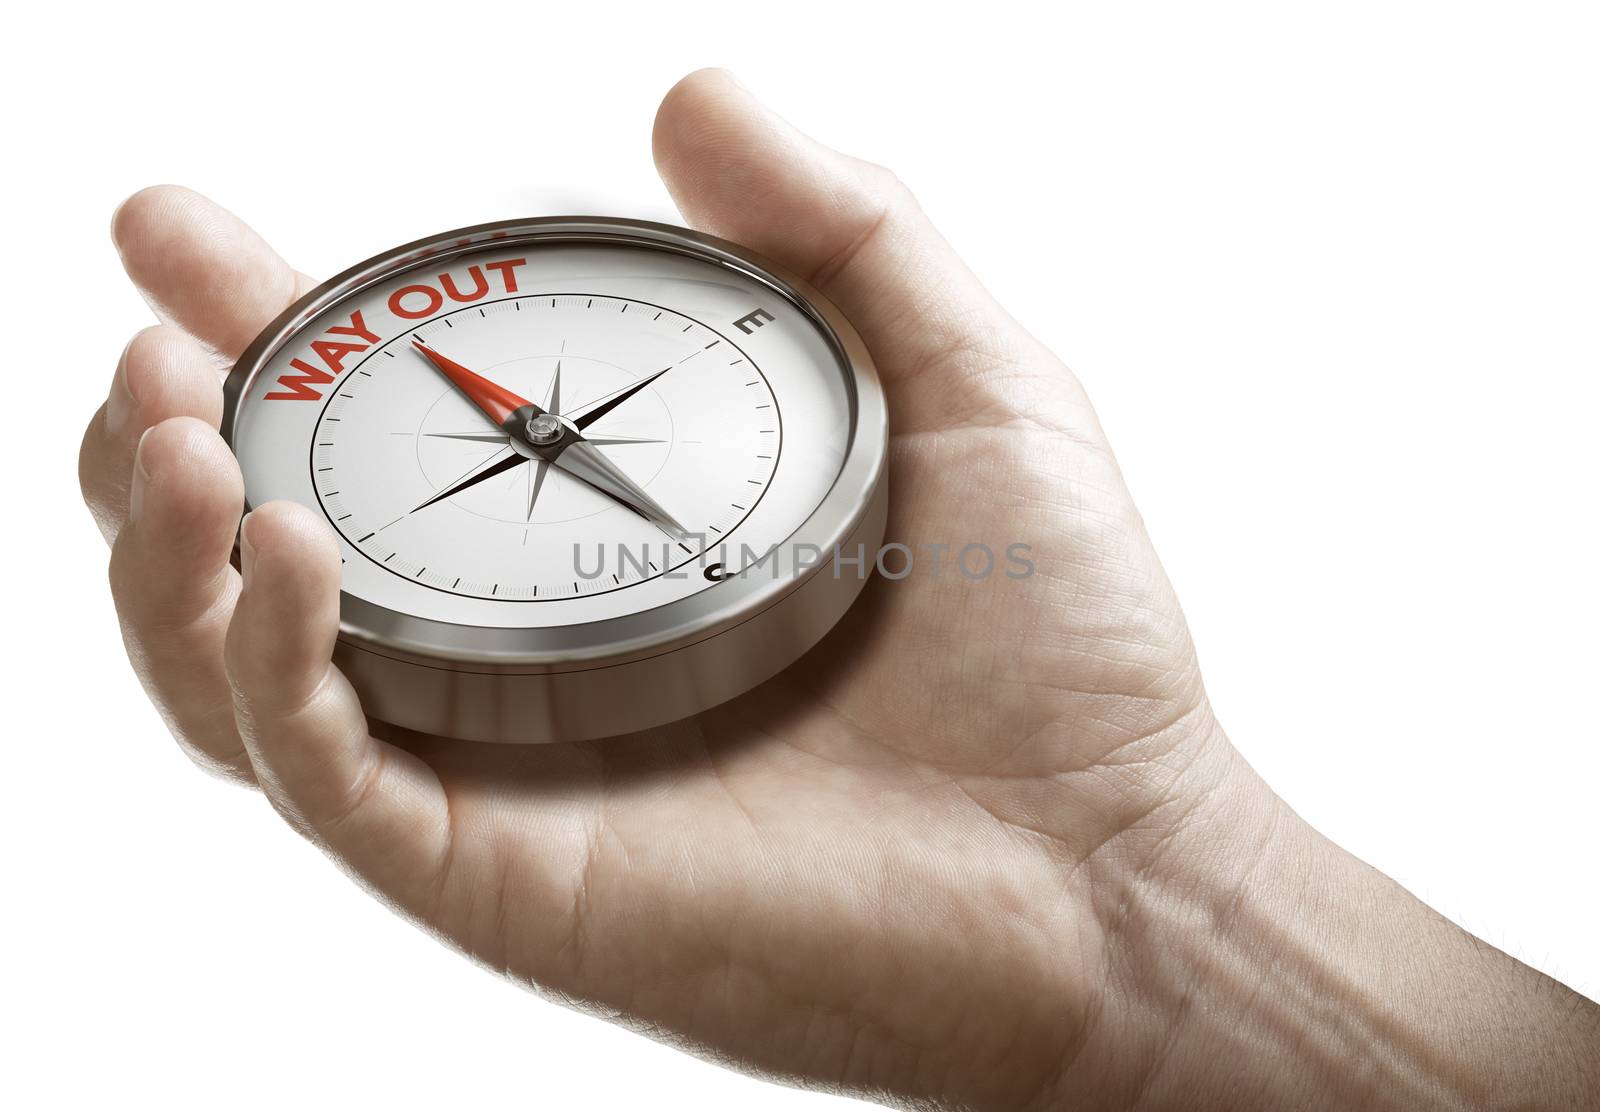 Man hand holding compass with needle pointing the text way out over white background. Concept of crisis exit plan or strategy. Composite image between a hand photography and a 3D background.